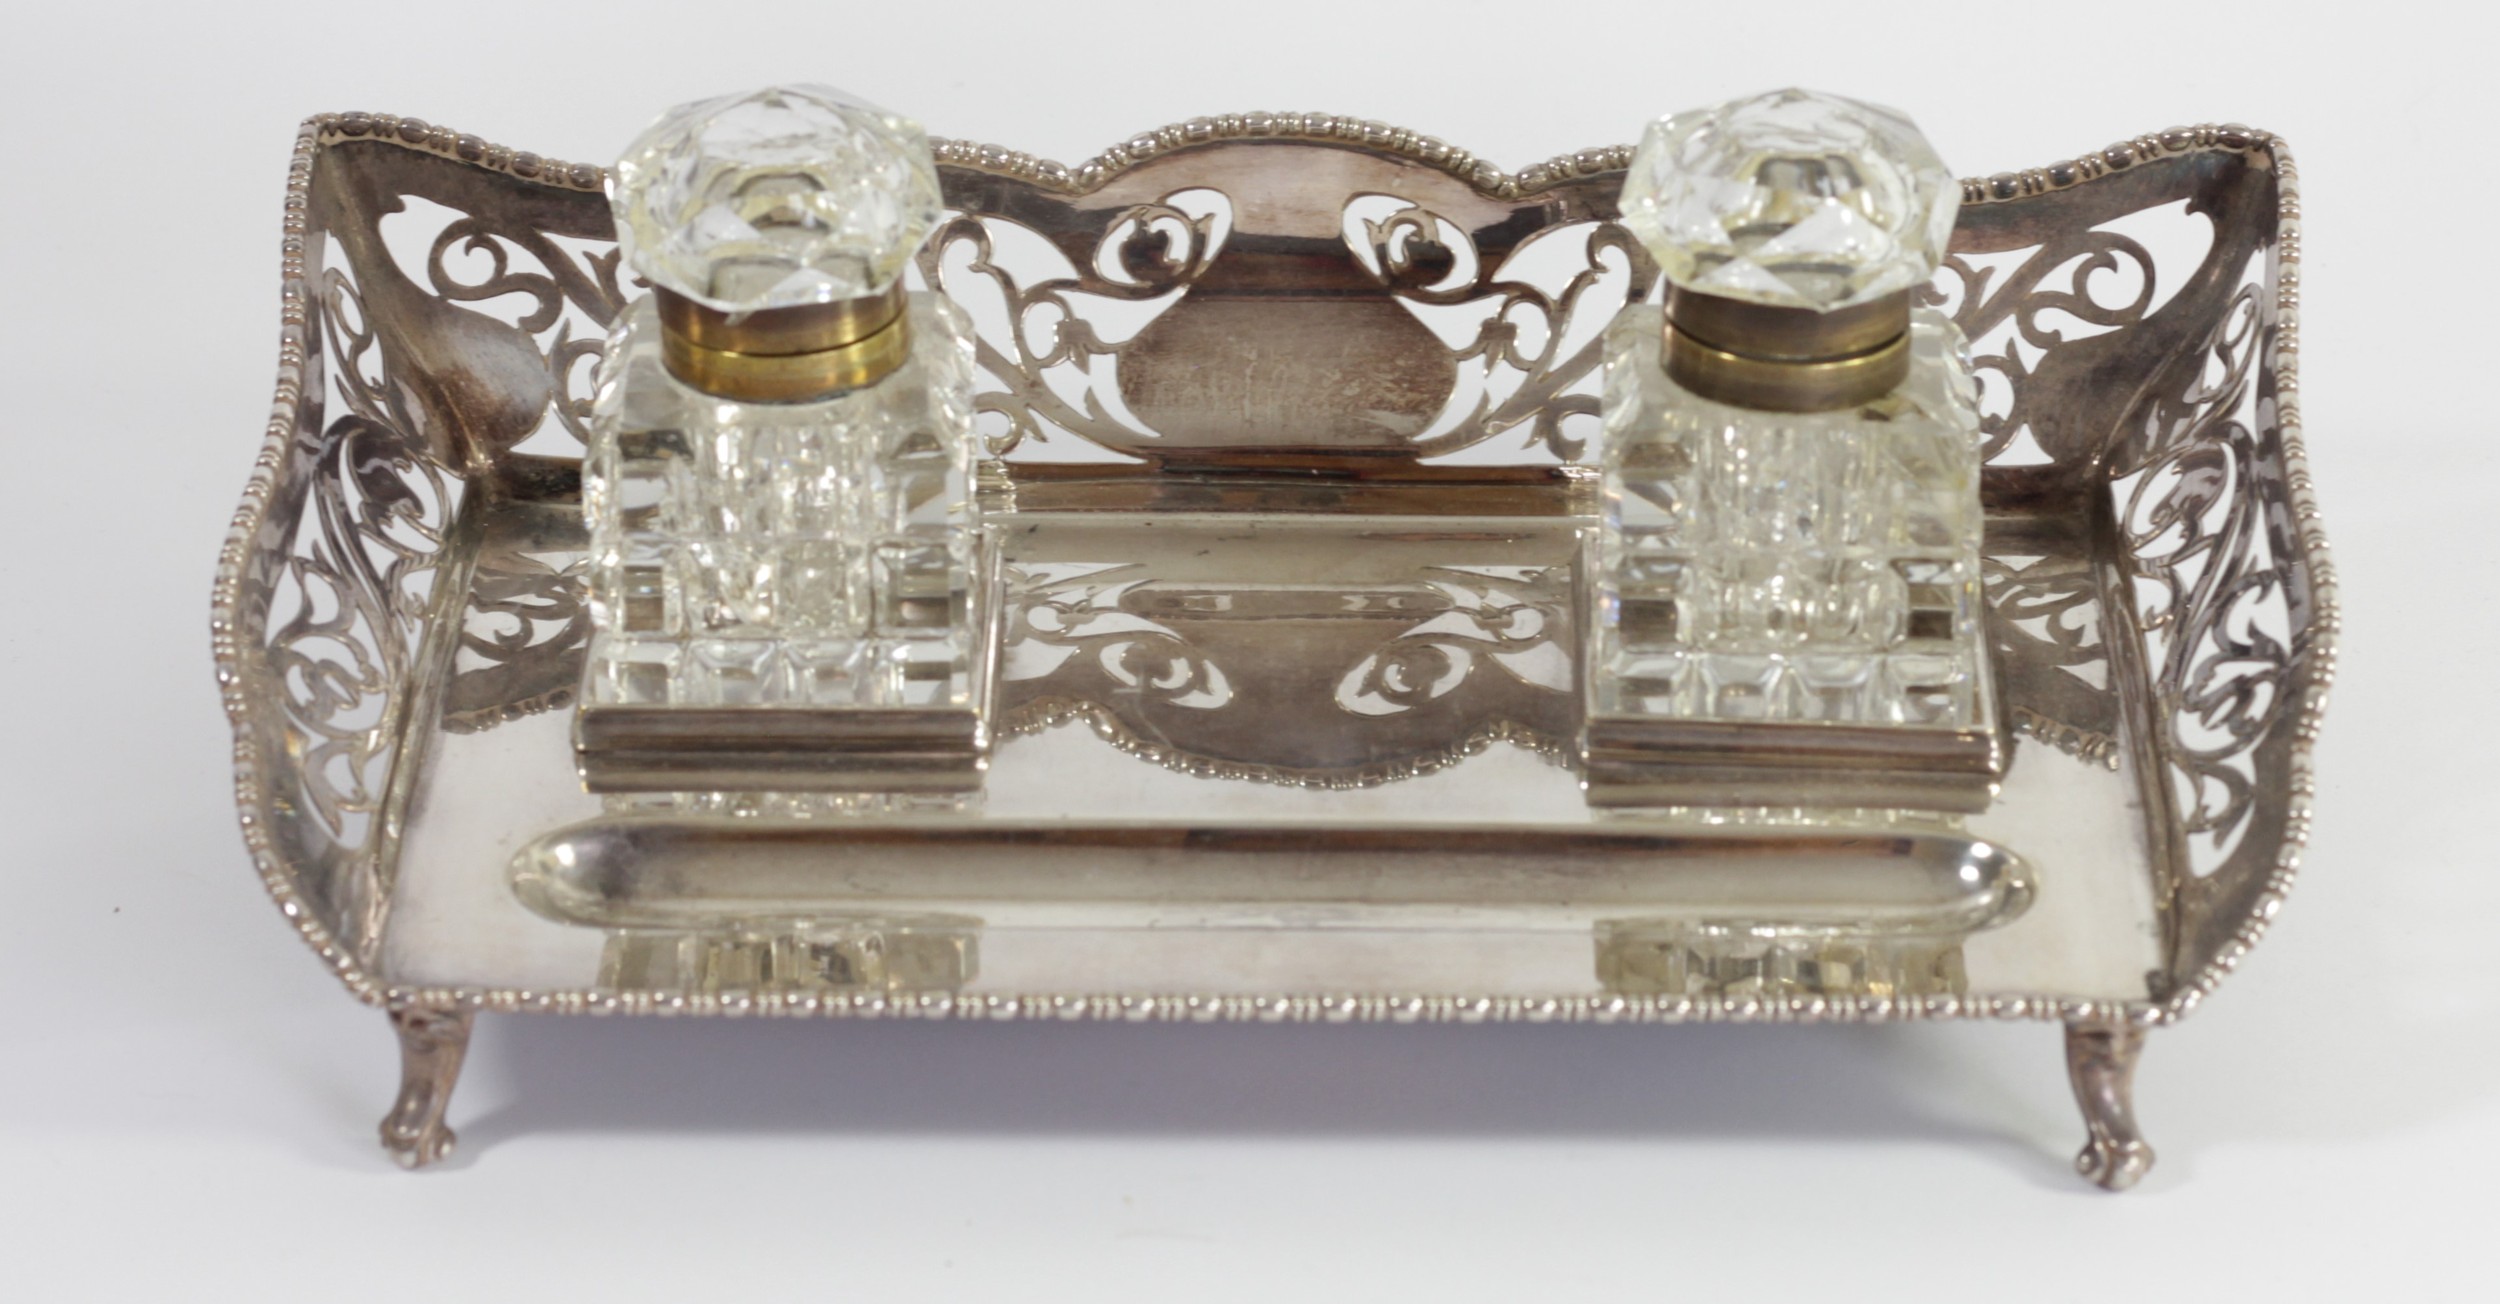 An electroplated two bottle desk stand, 3/4 pierced gallery with gadrooned border, cut glass brass